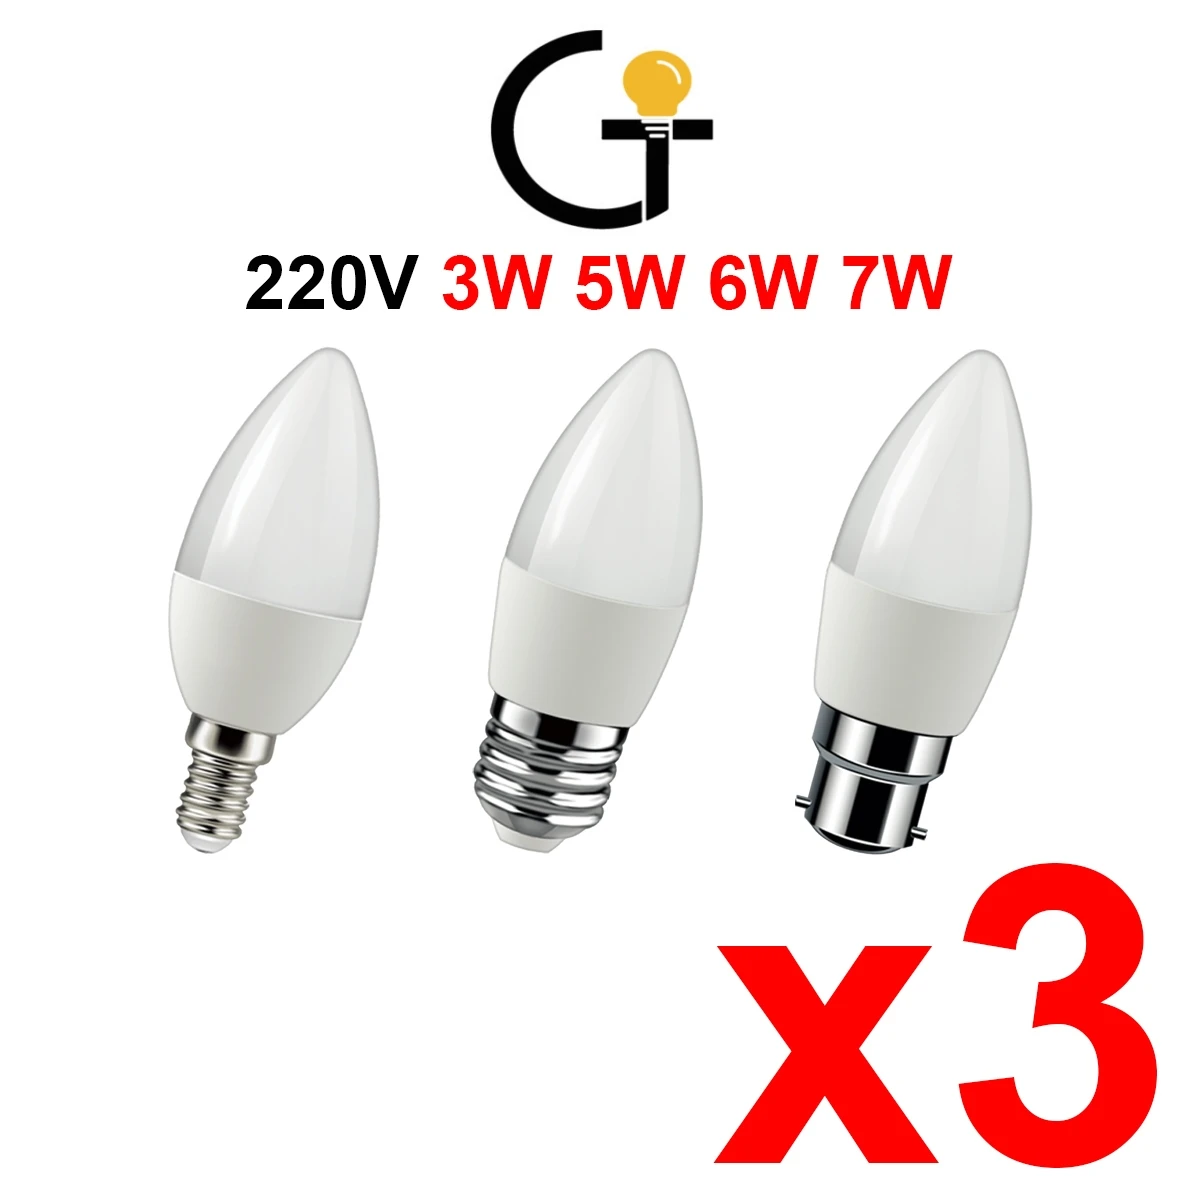 3PCS LED candle lamp C37 220V 3W-7W Strobe-free warm white light for crystal chandelier down lamp kitchen bathroom